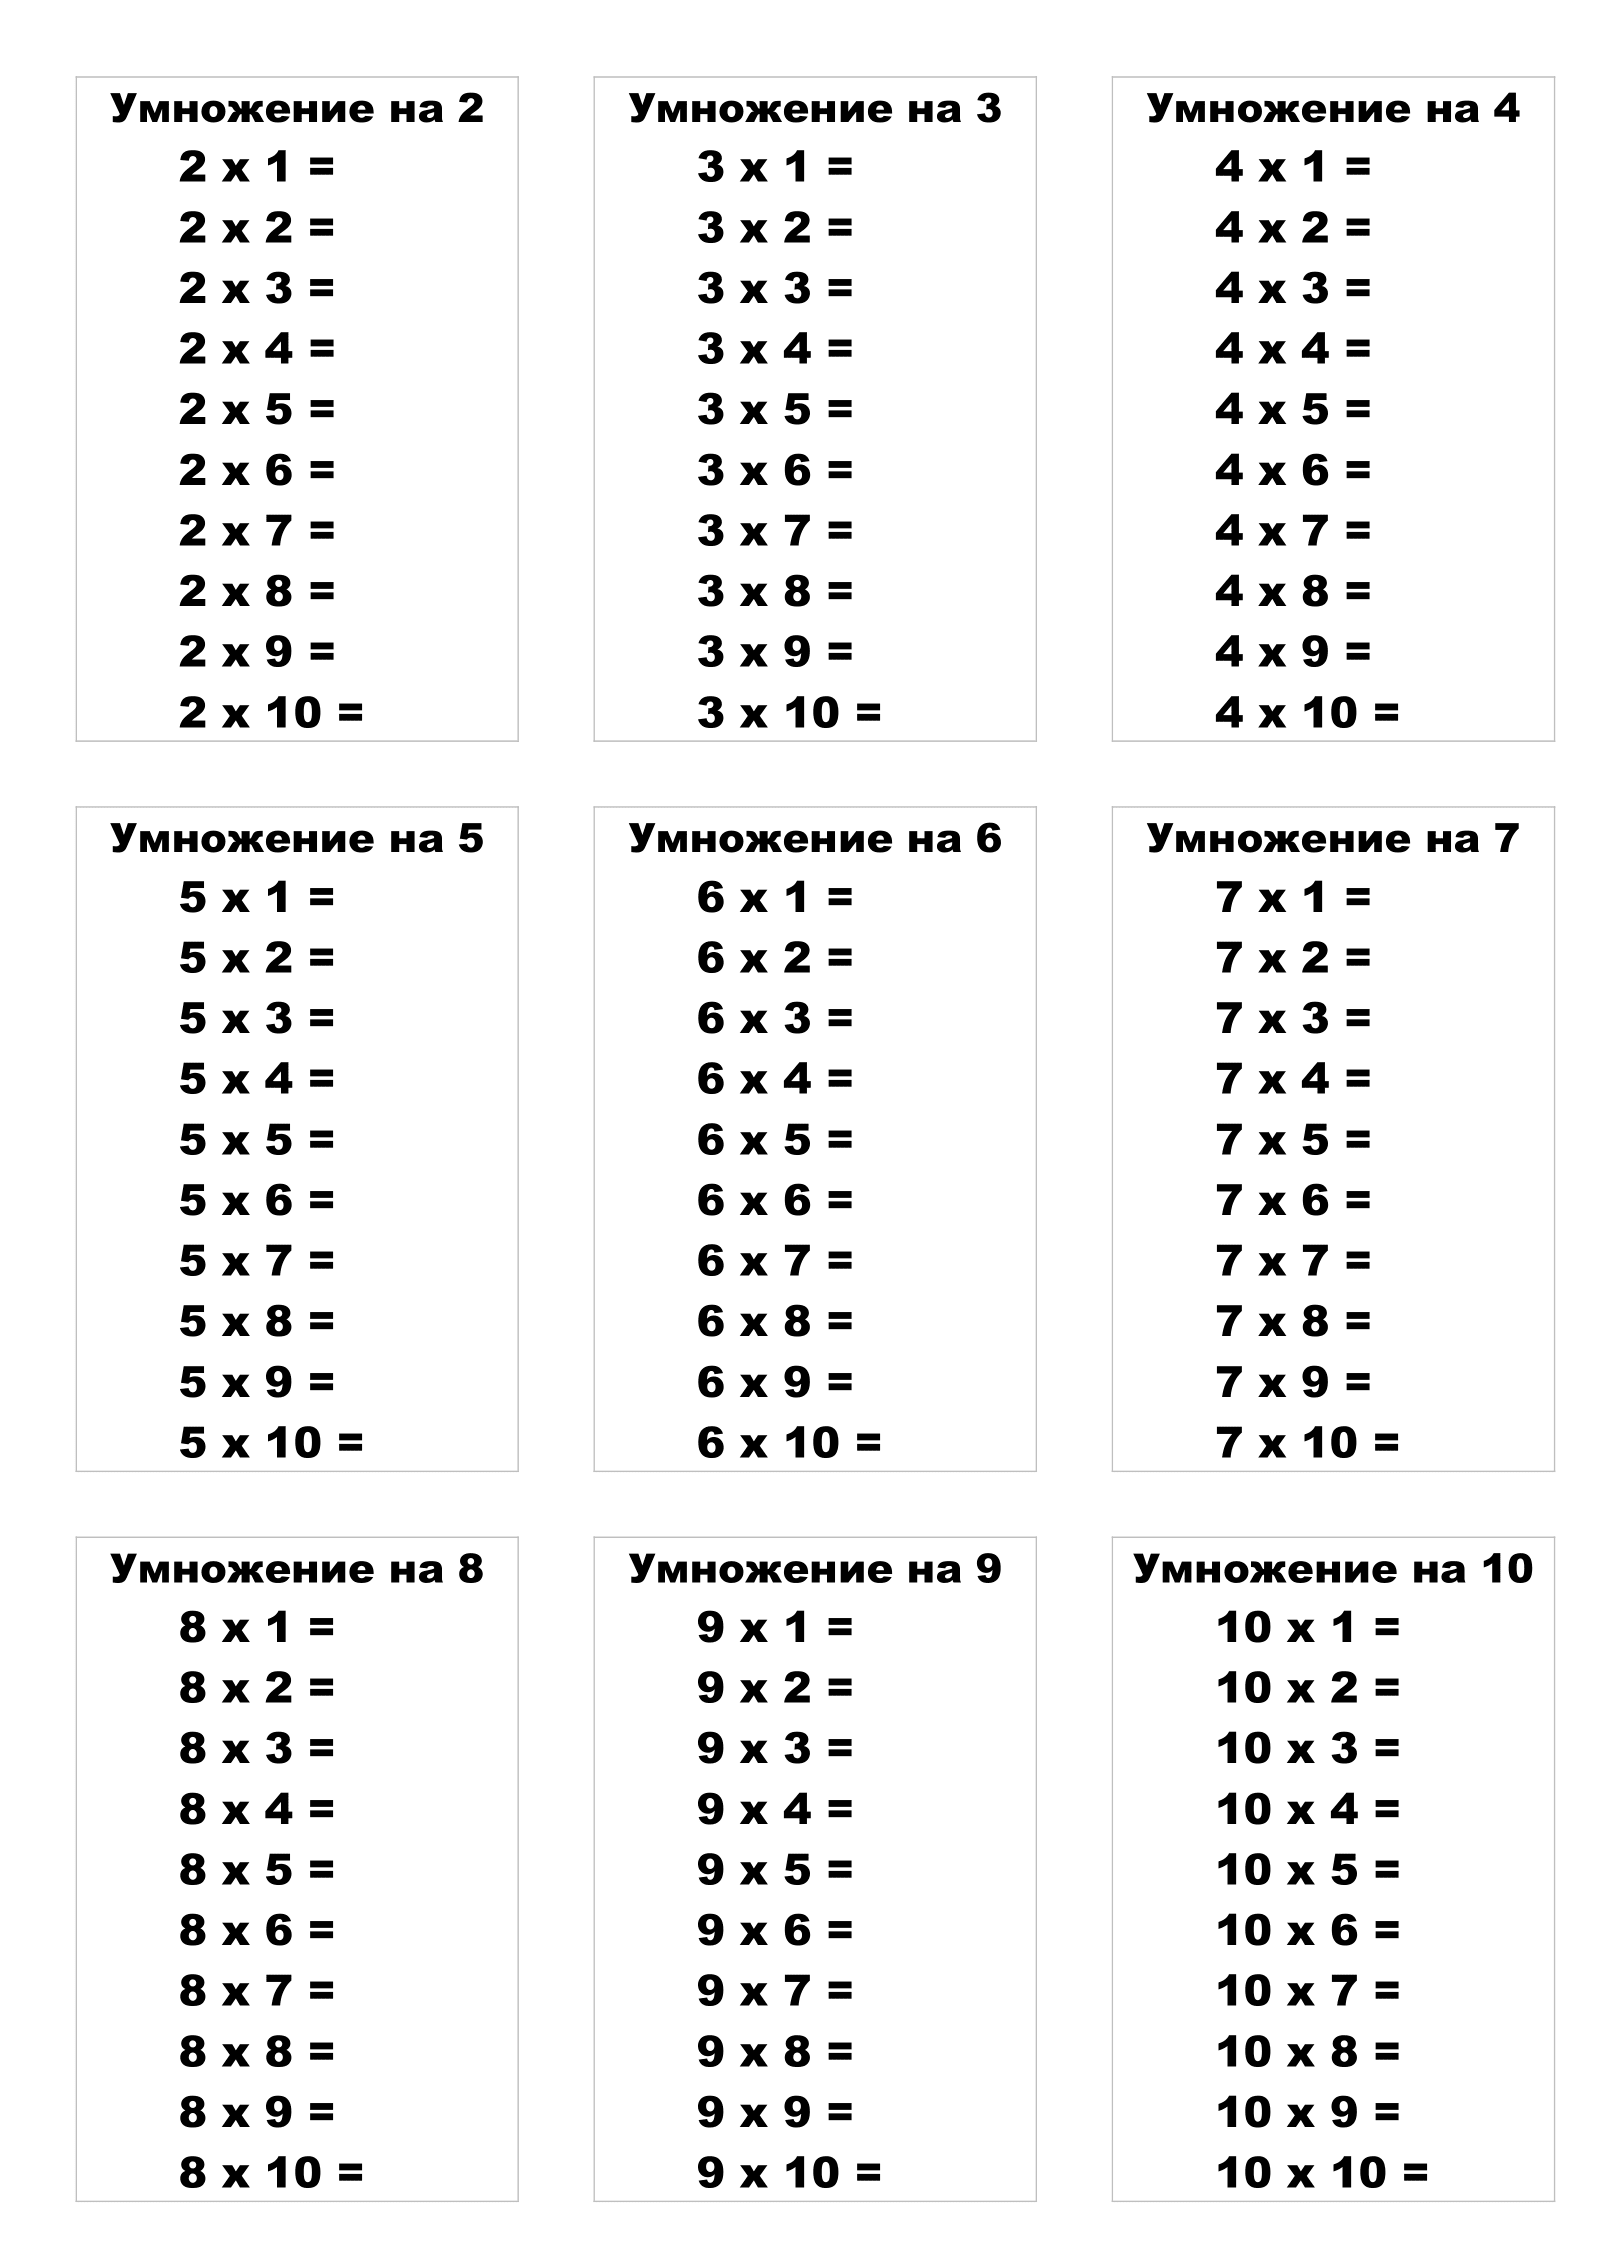 Multiplication Table Without Answers. Print